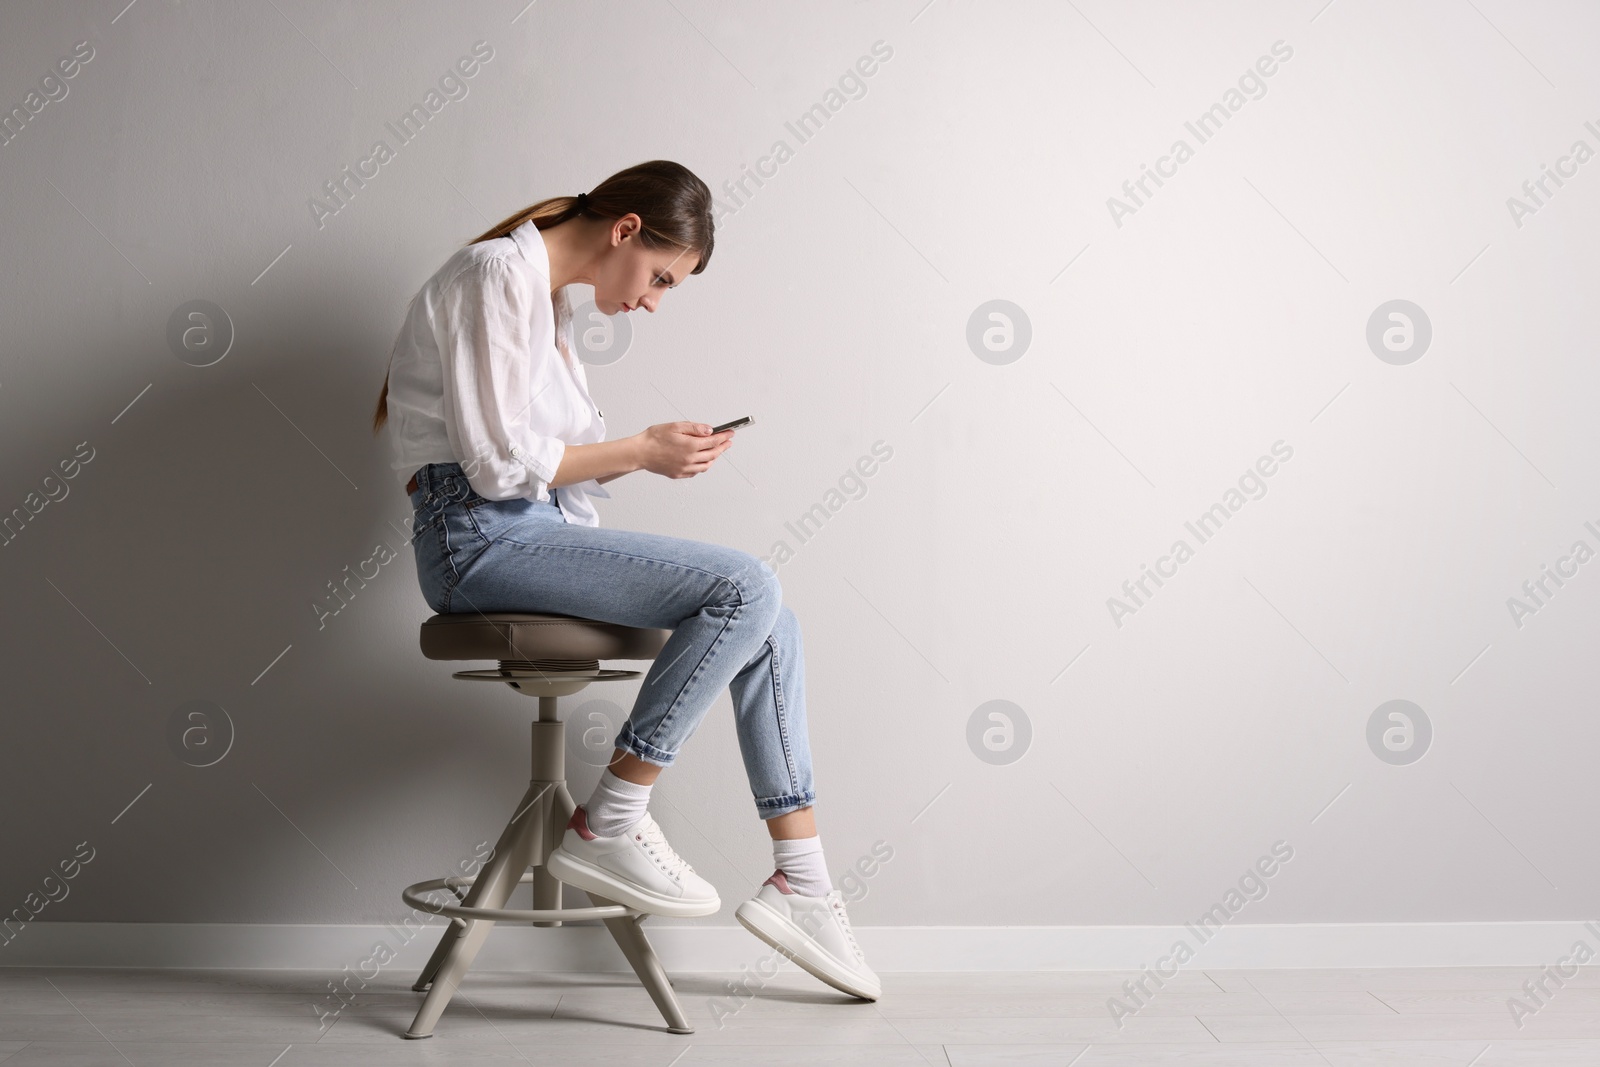 Photo of Woman with bad posture using smartphone while sitting on stool near light grey wall indoors, space for text